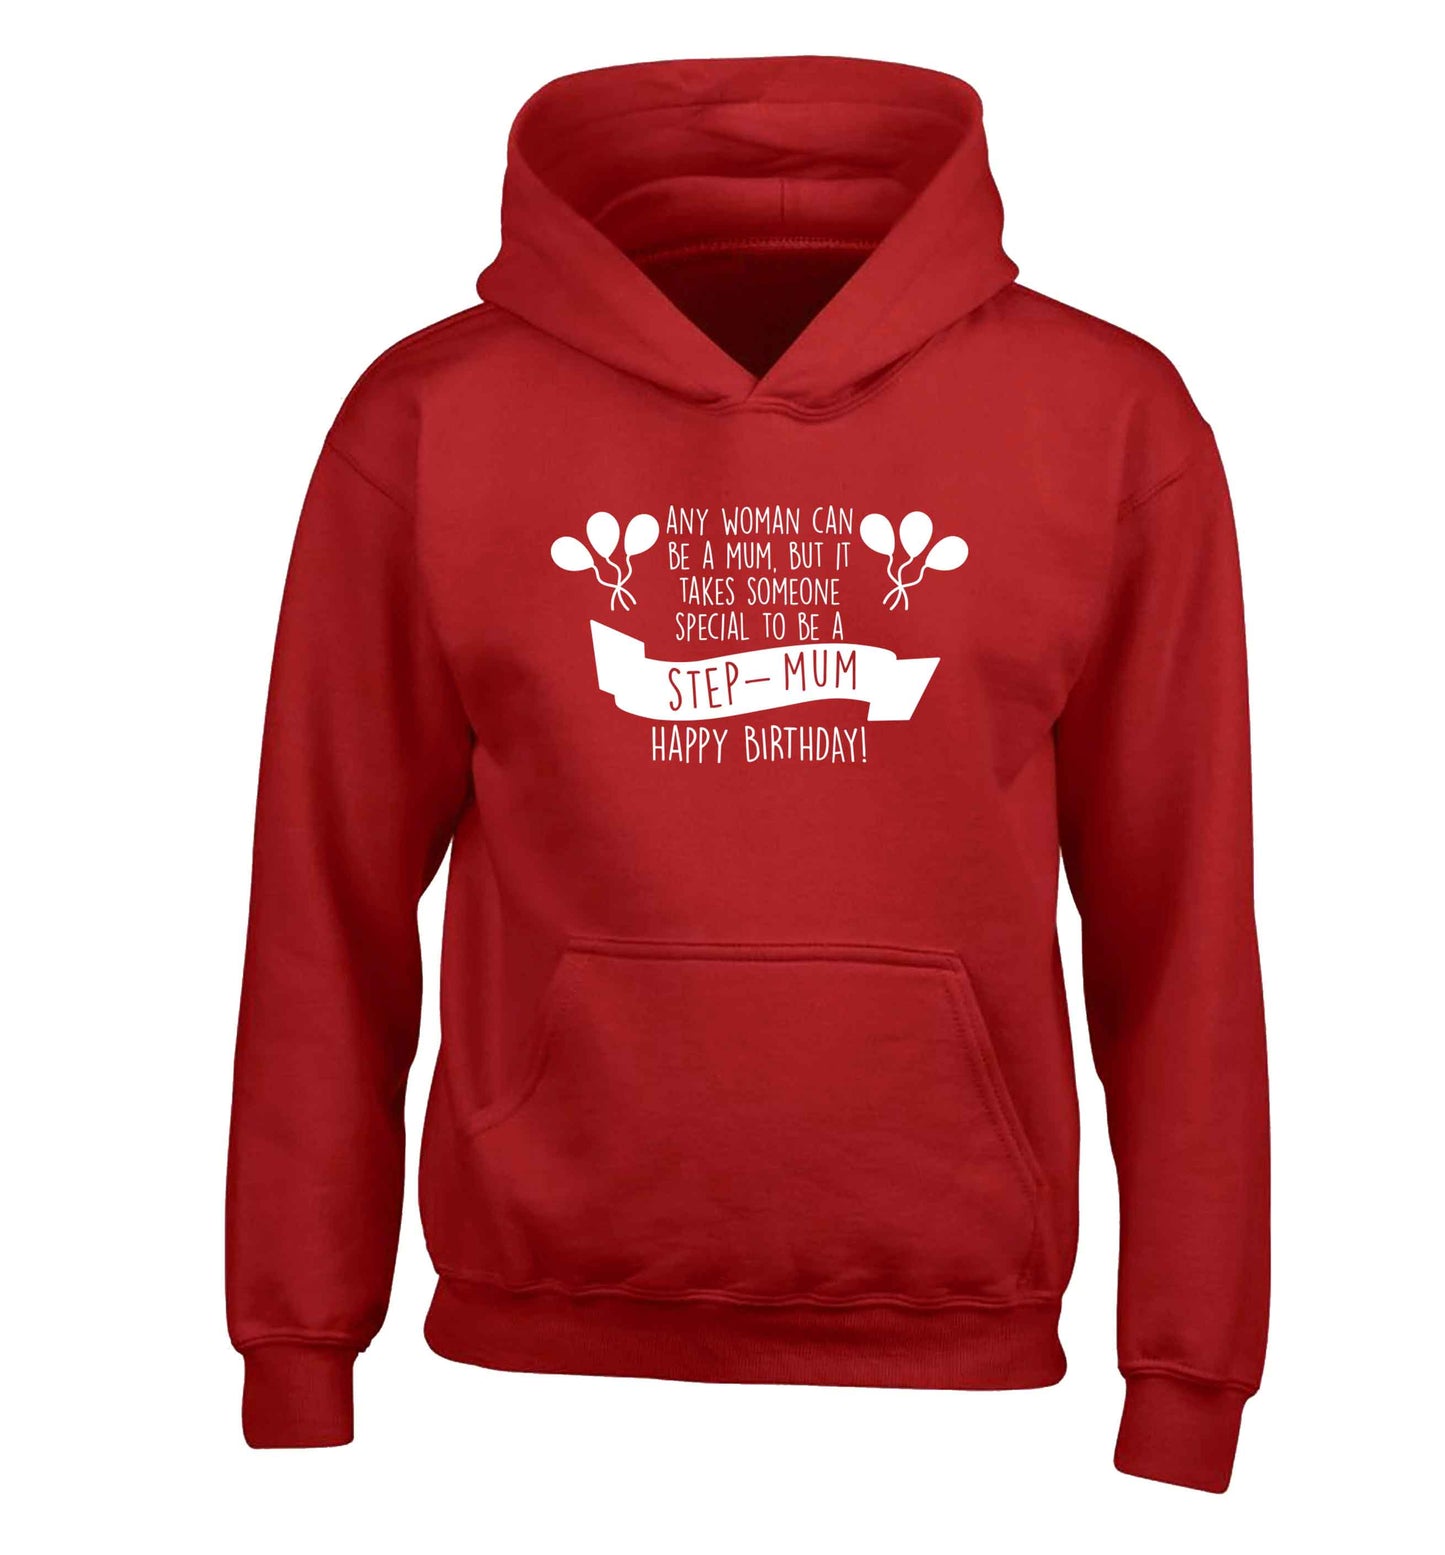 Takes someone special to be a step-mum, happy birthday! children's red hoodie 12-13 Years